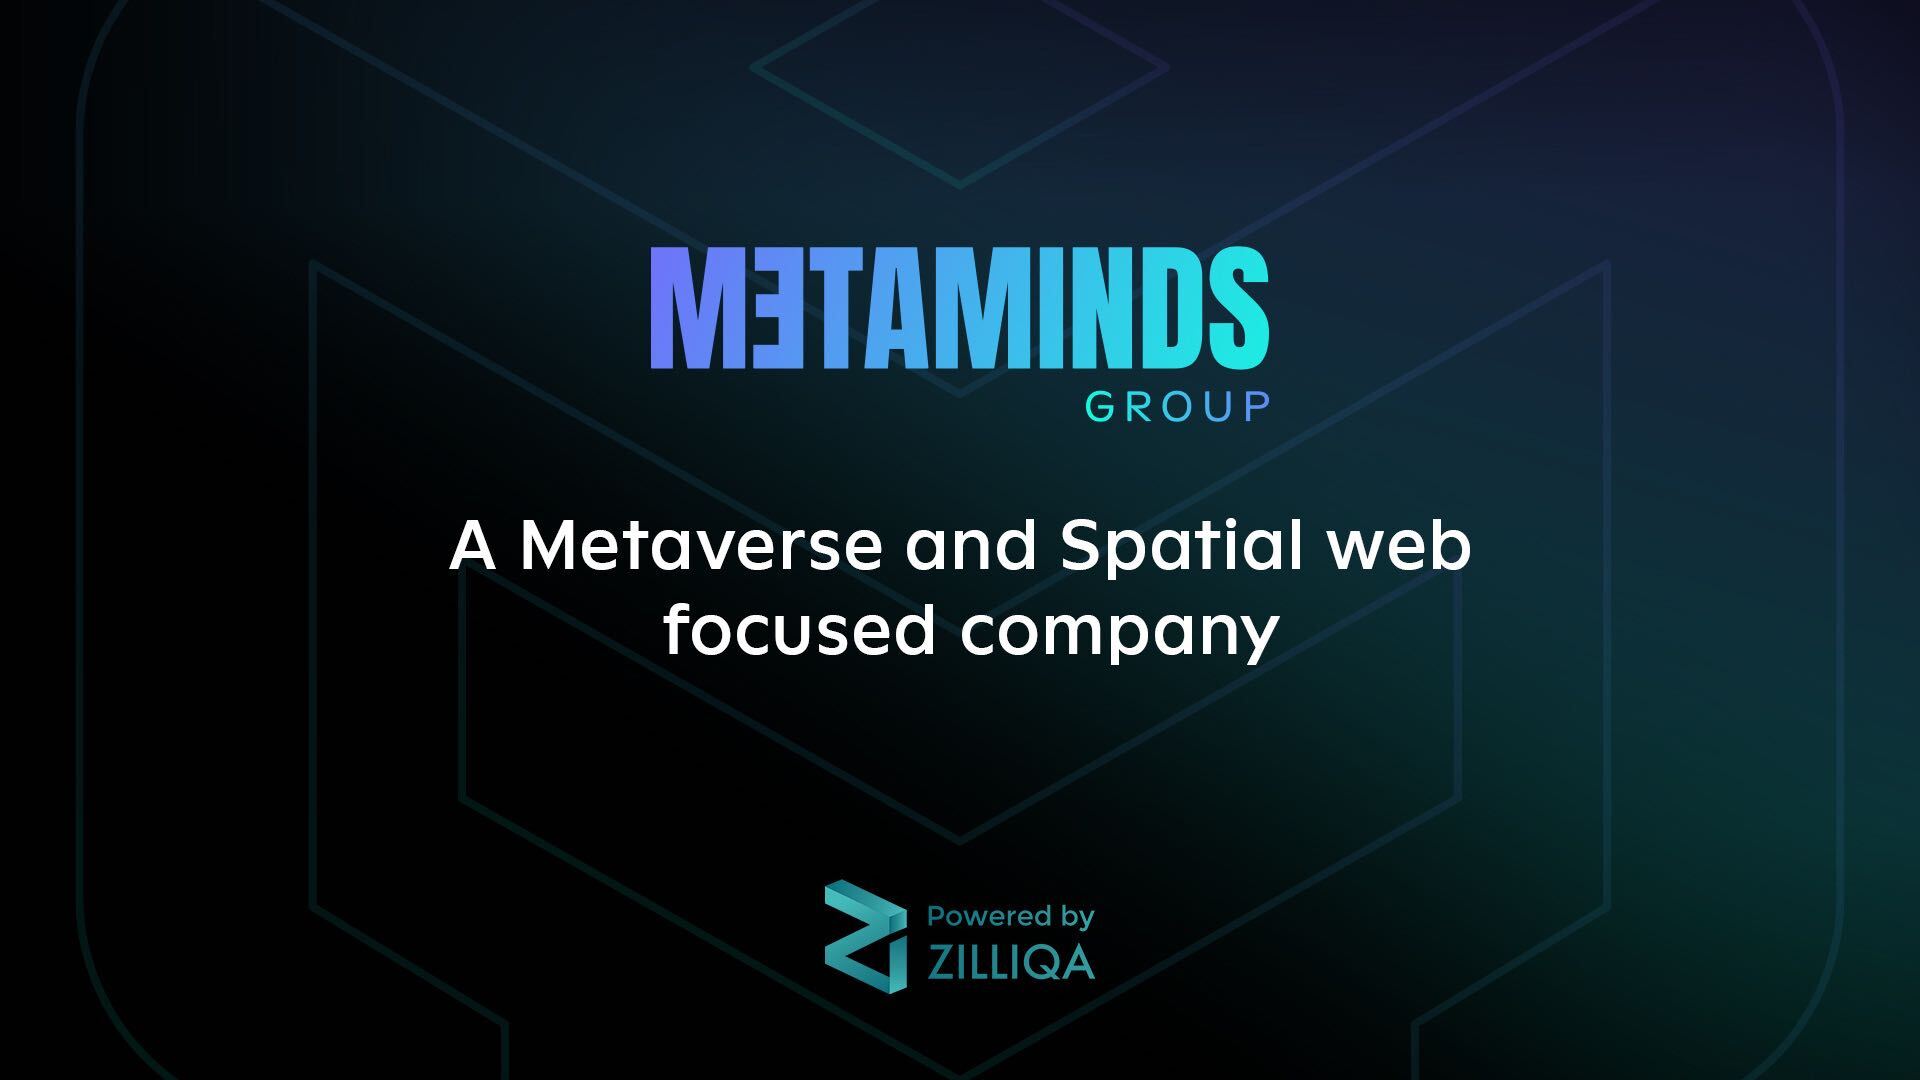 Zilliqa Group relaunches metaverse venture as MetaMinds following business restructure